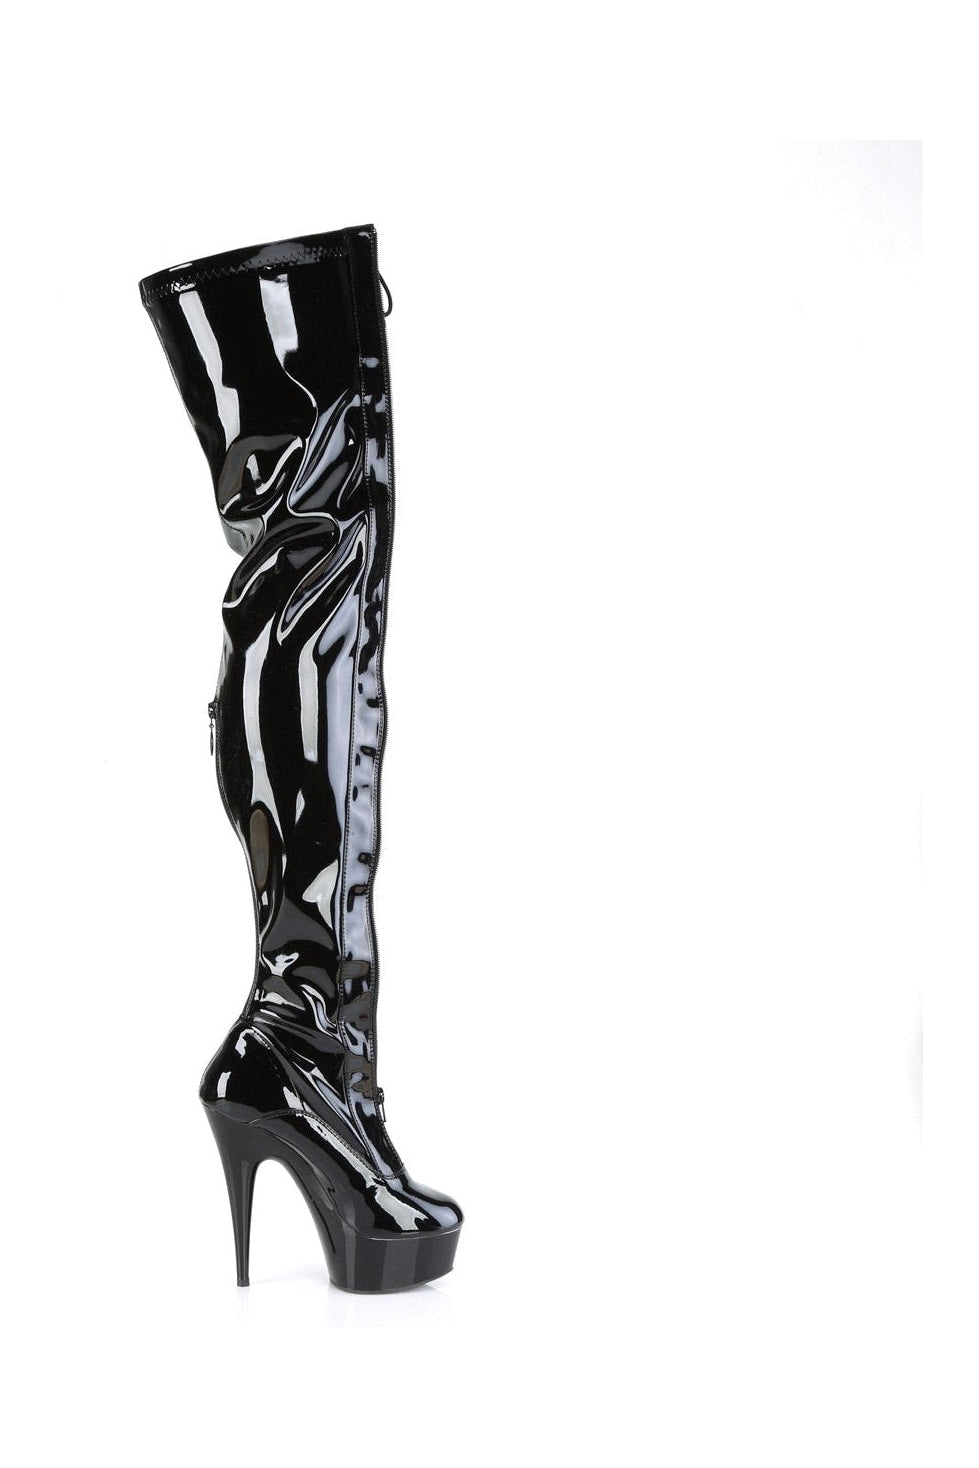 DELIGHT-3027 Thigh Boot | Black Patent-Thigh Boots-Pleaser-SEXYSHOES.COM